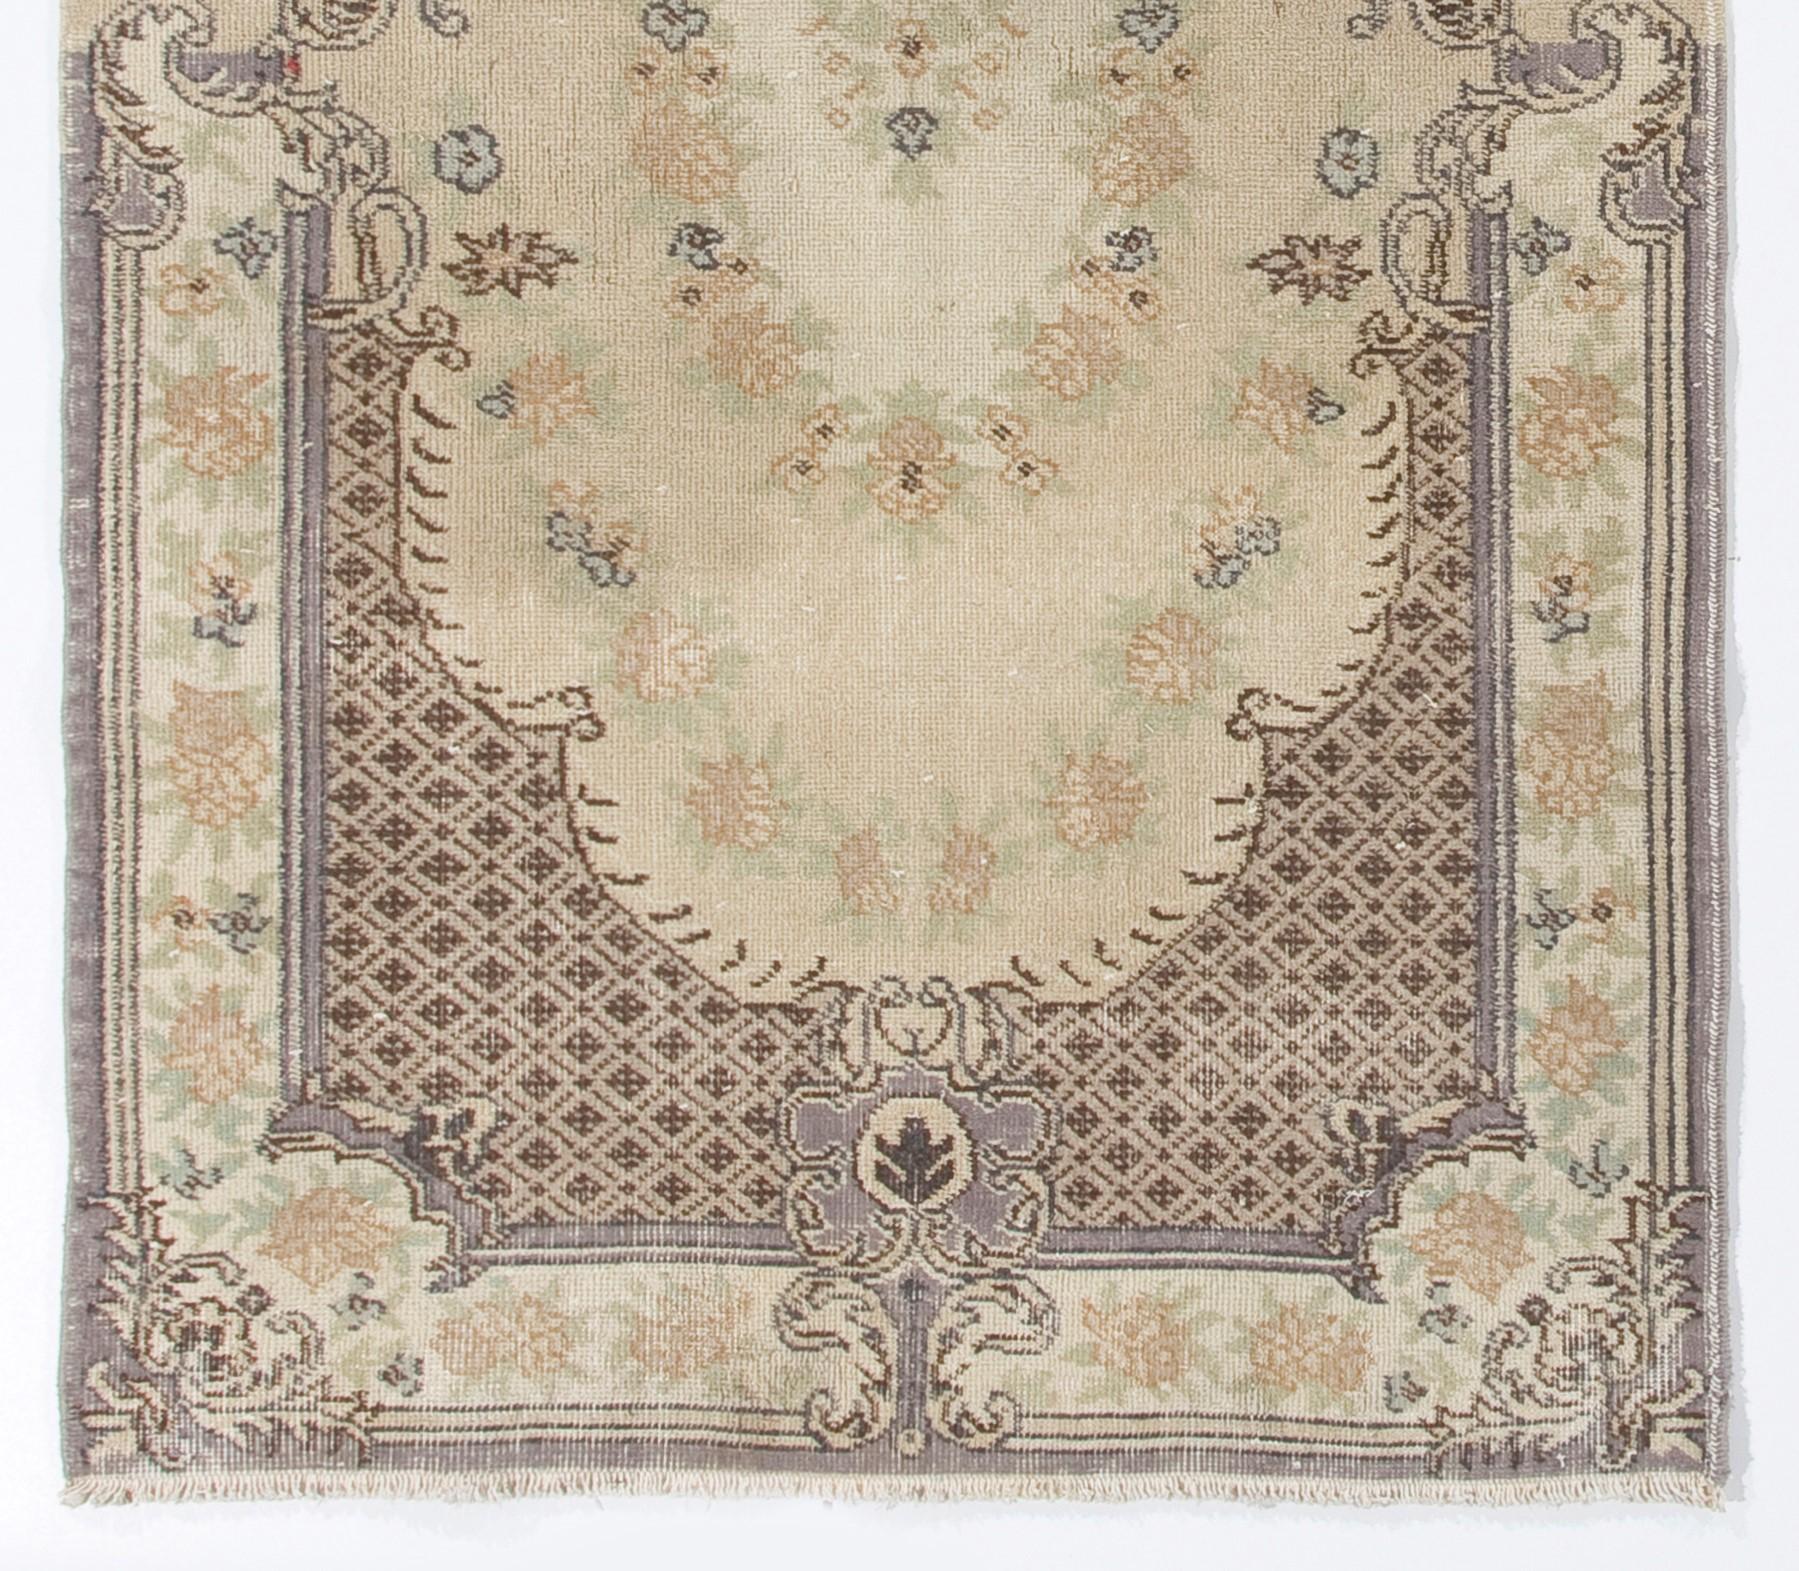 Oushak 3.8x7 Ft Vintage Hand-Knotted Aubusson-Inspired Turkish Wool Rug in Beige For Sale